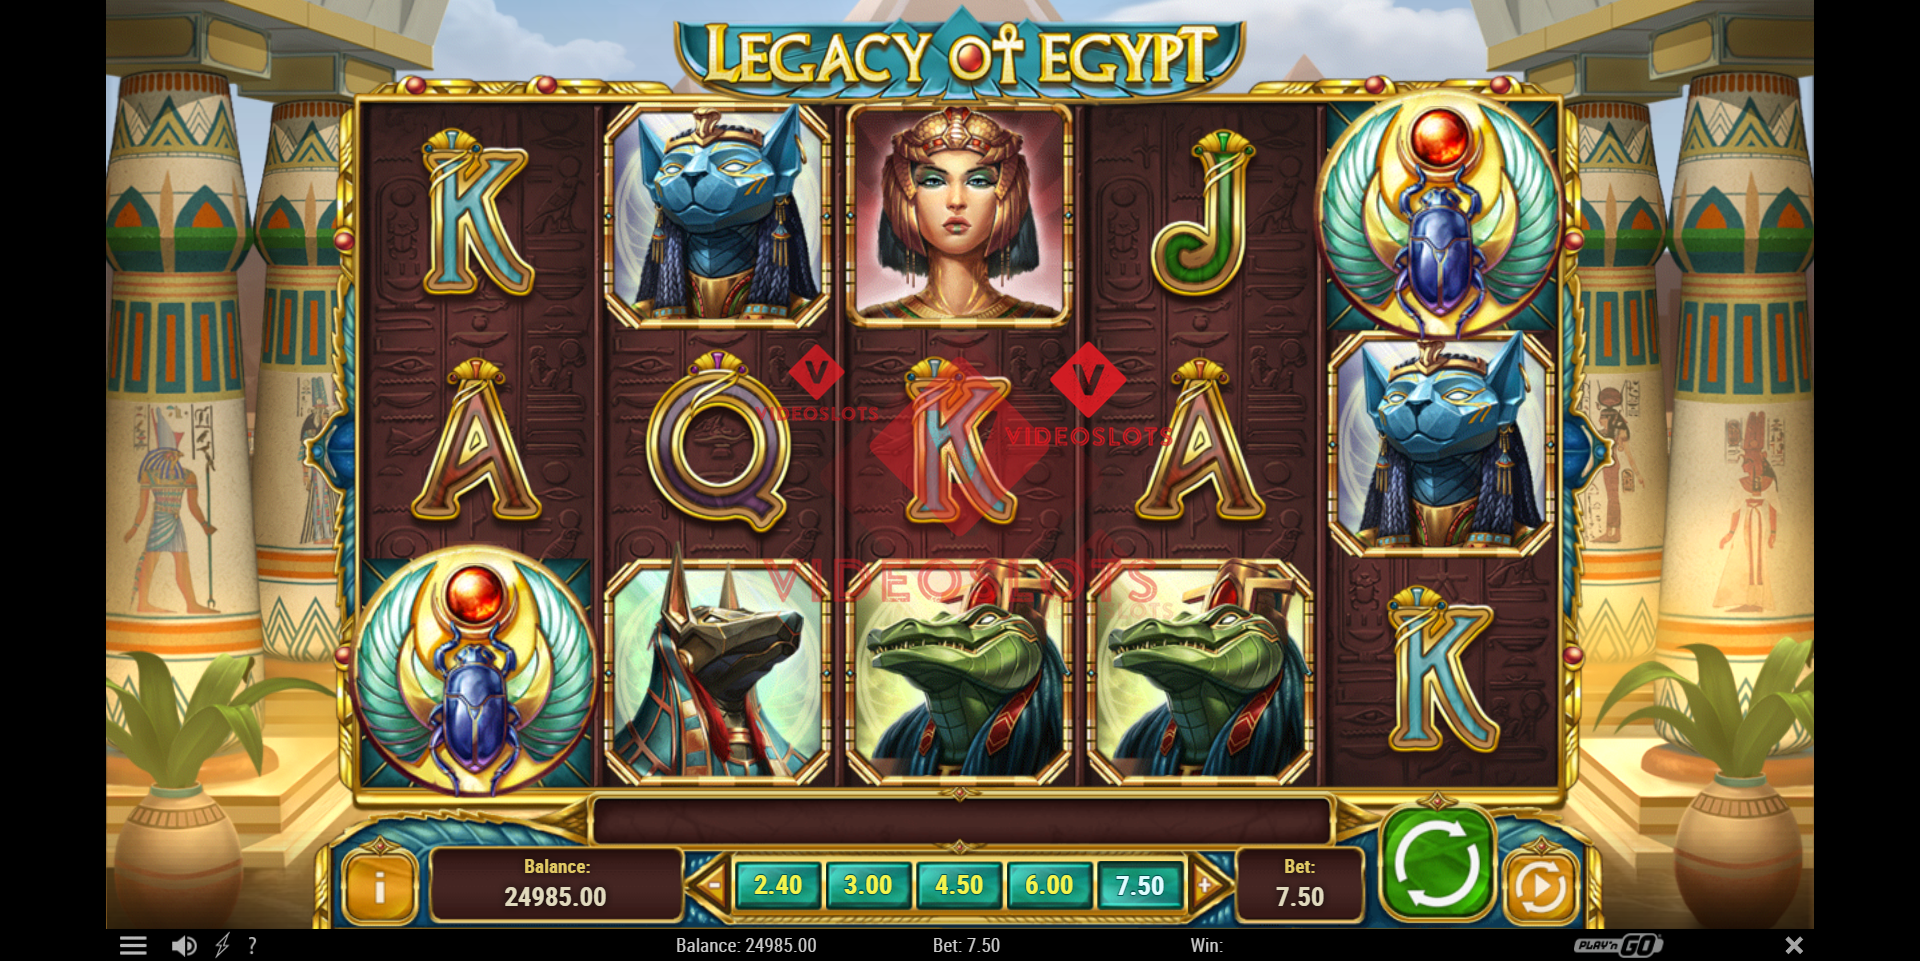 Base Game for Legacy of Egypt slot from Play'n Go